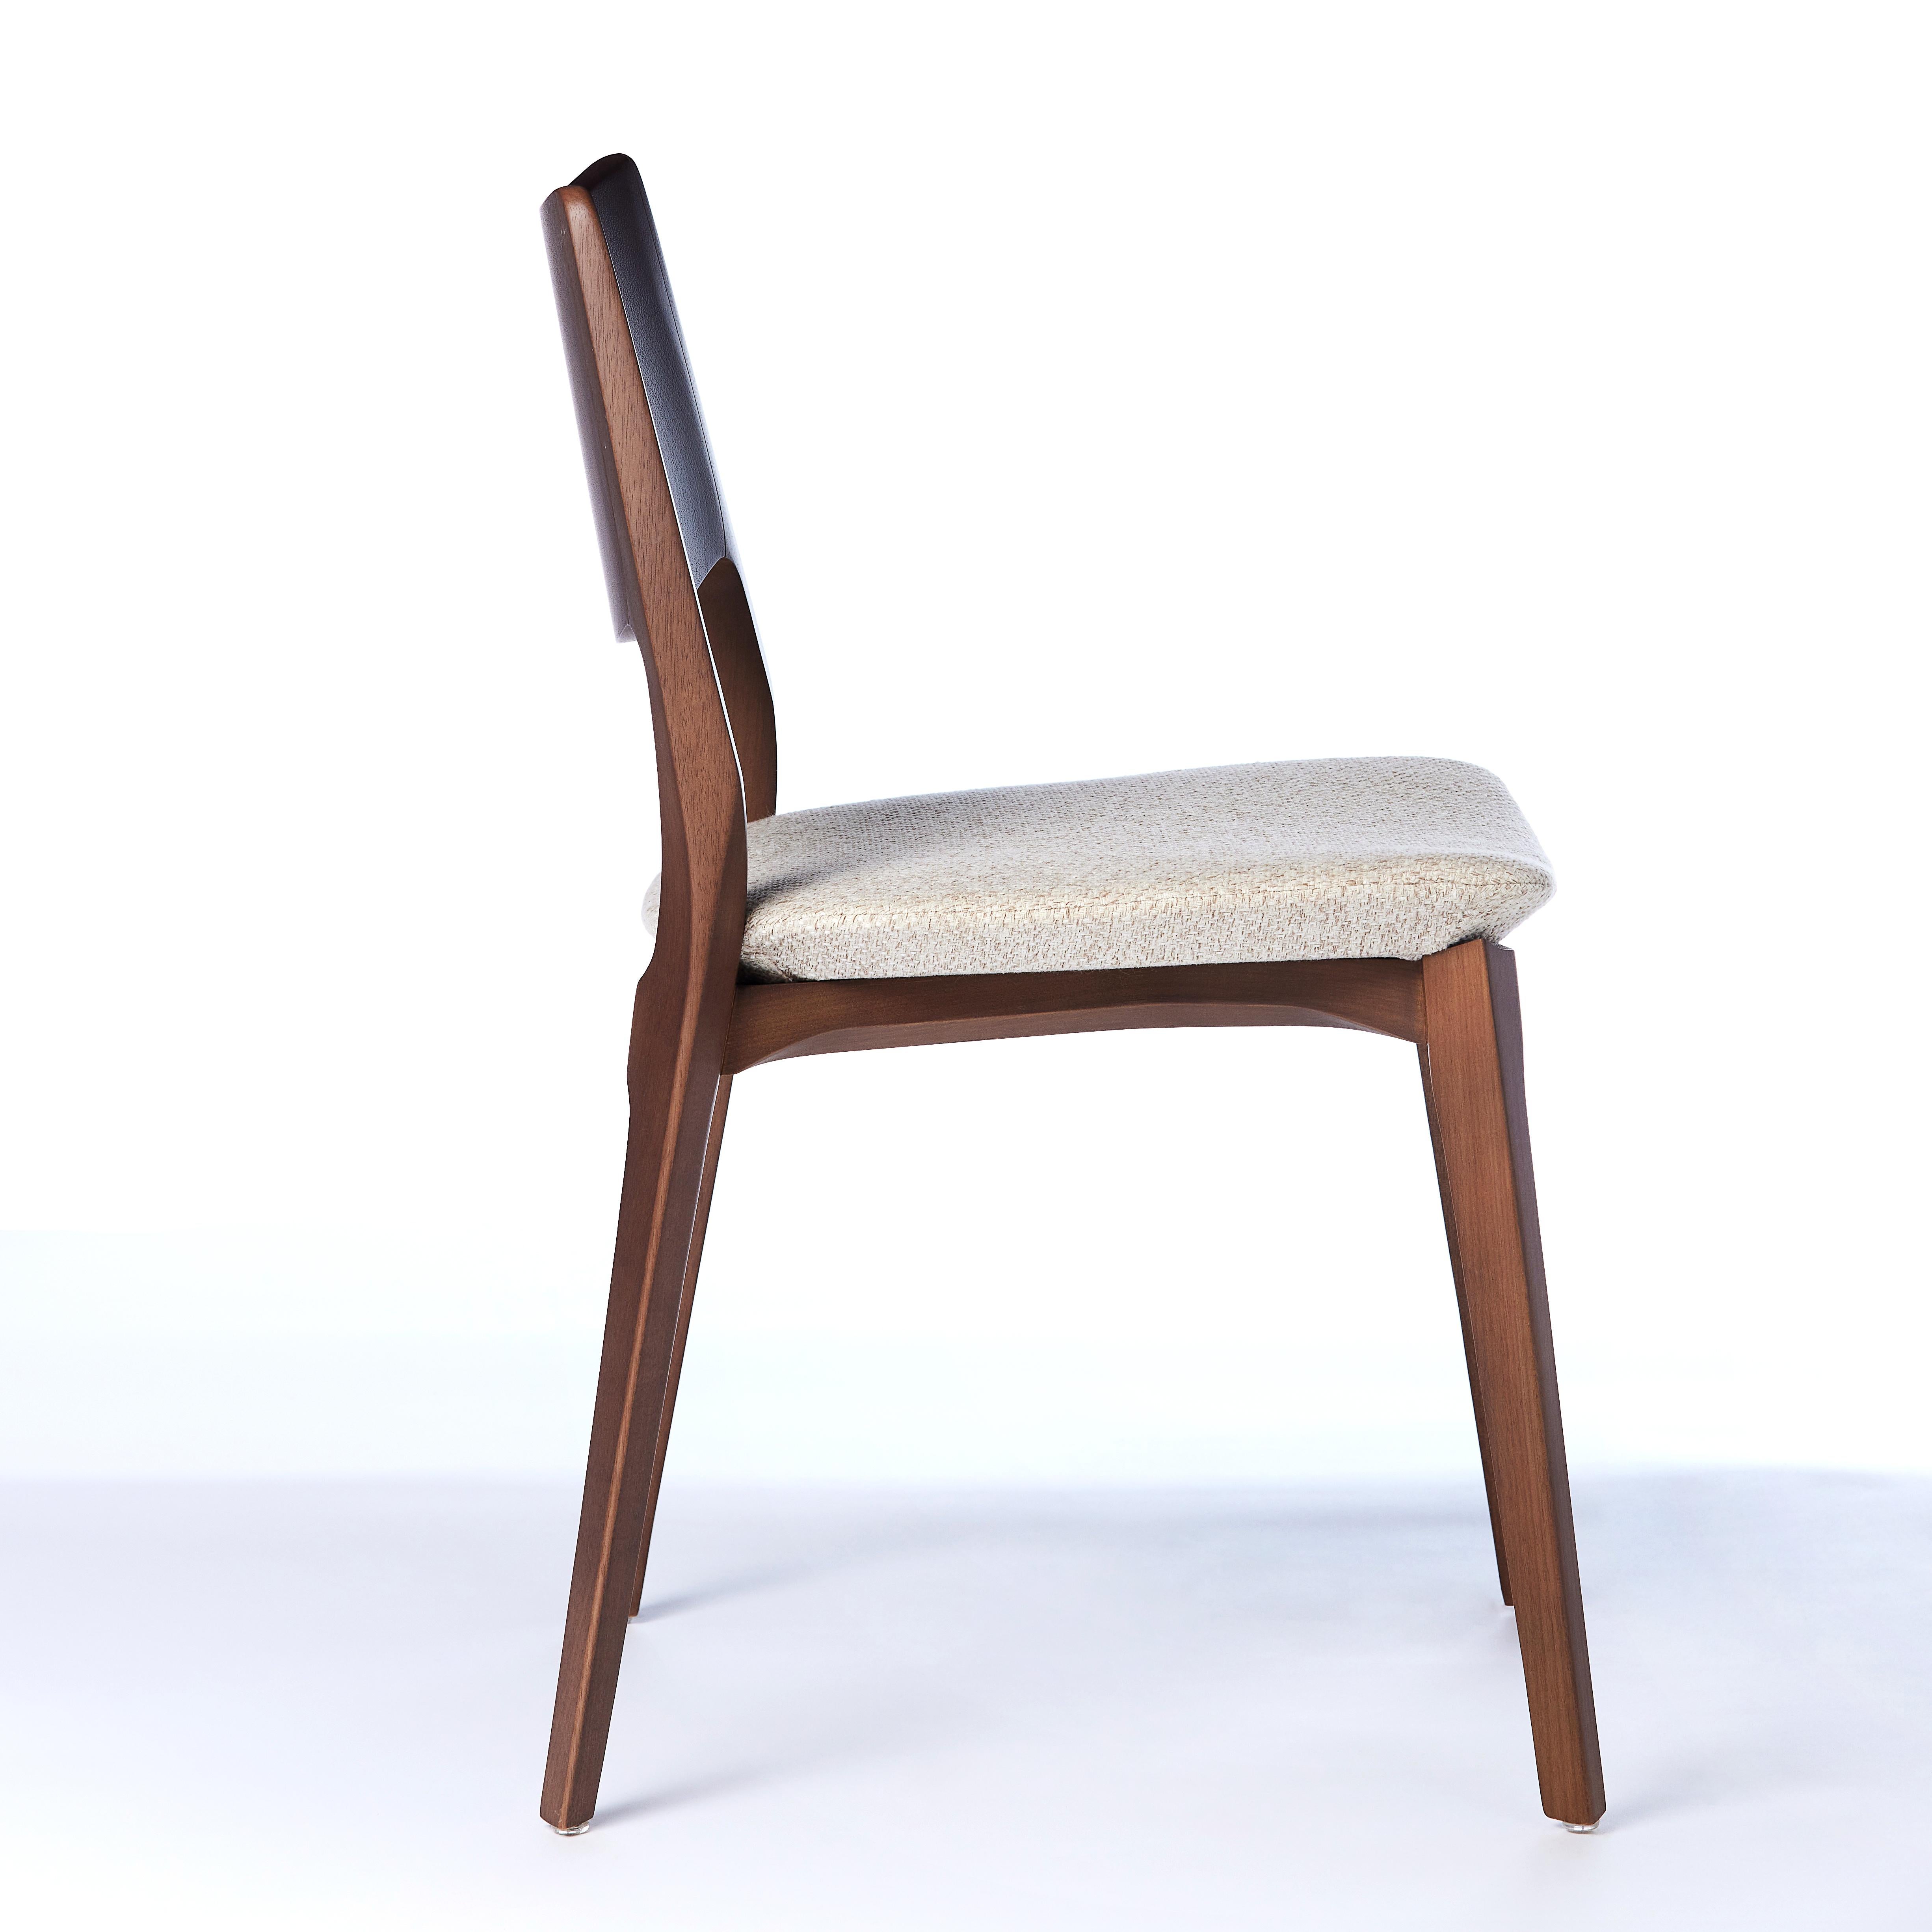 Postmoderne The Moderns Aurora Chair Sculptured in Walnut Finish No Arms, Upholstering Seat en vente